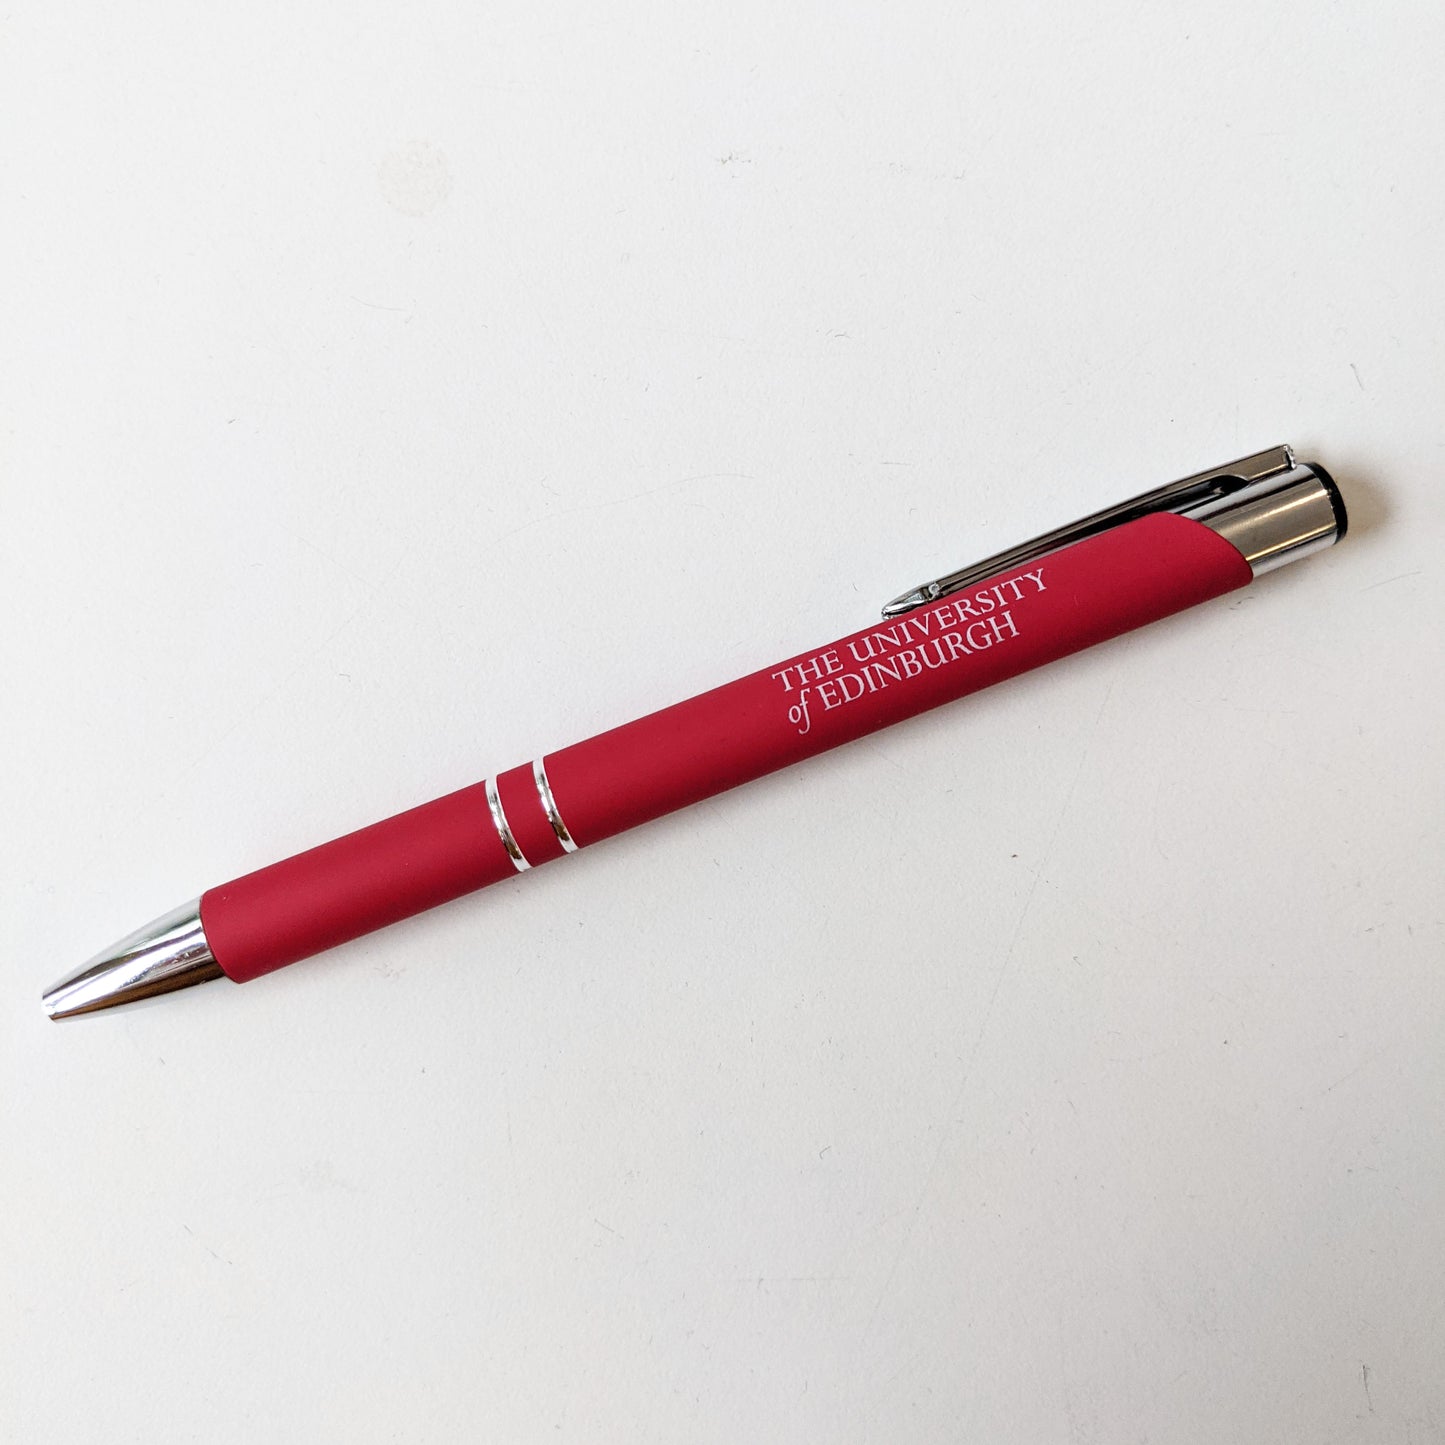 Red soft feel pen with 'The University of Edinburgh' printed on the barrel in white.